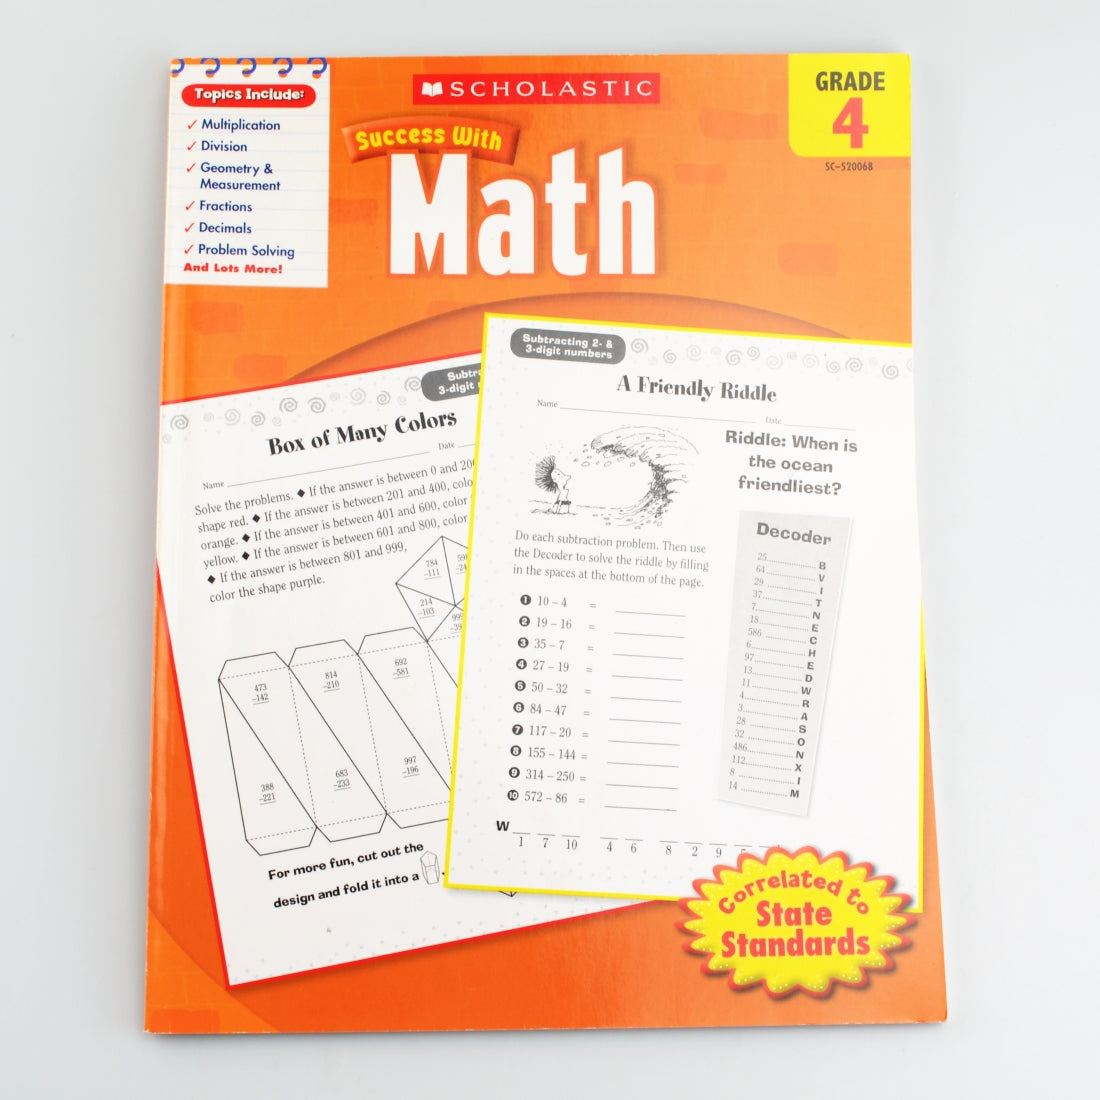 Success With Math Grade 4 by Scholastic Teaching Resources